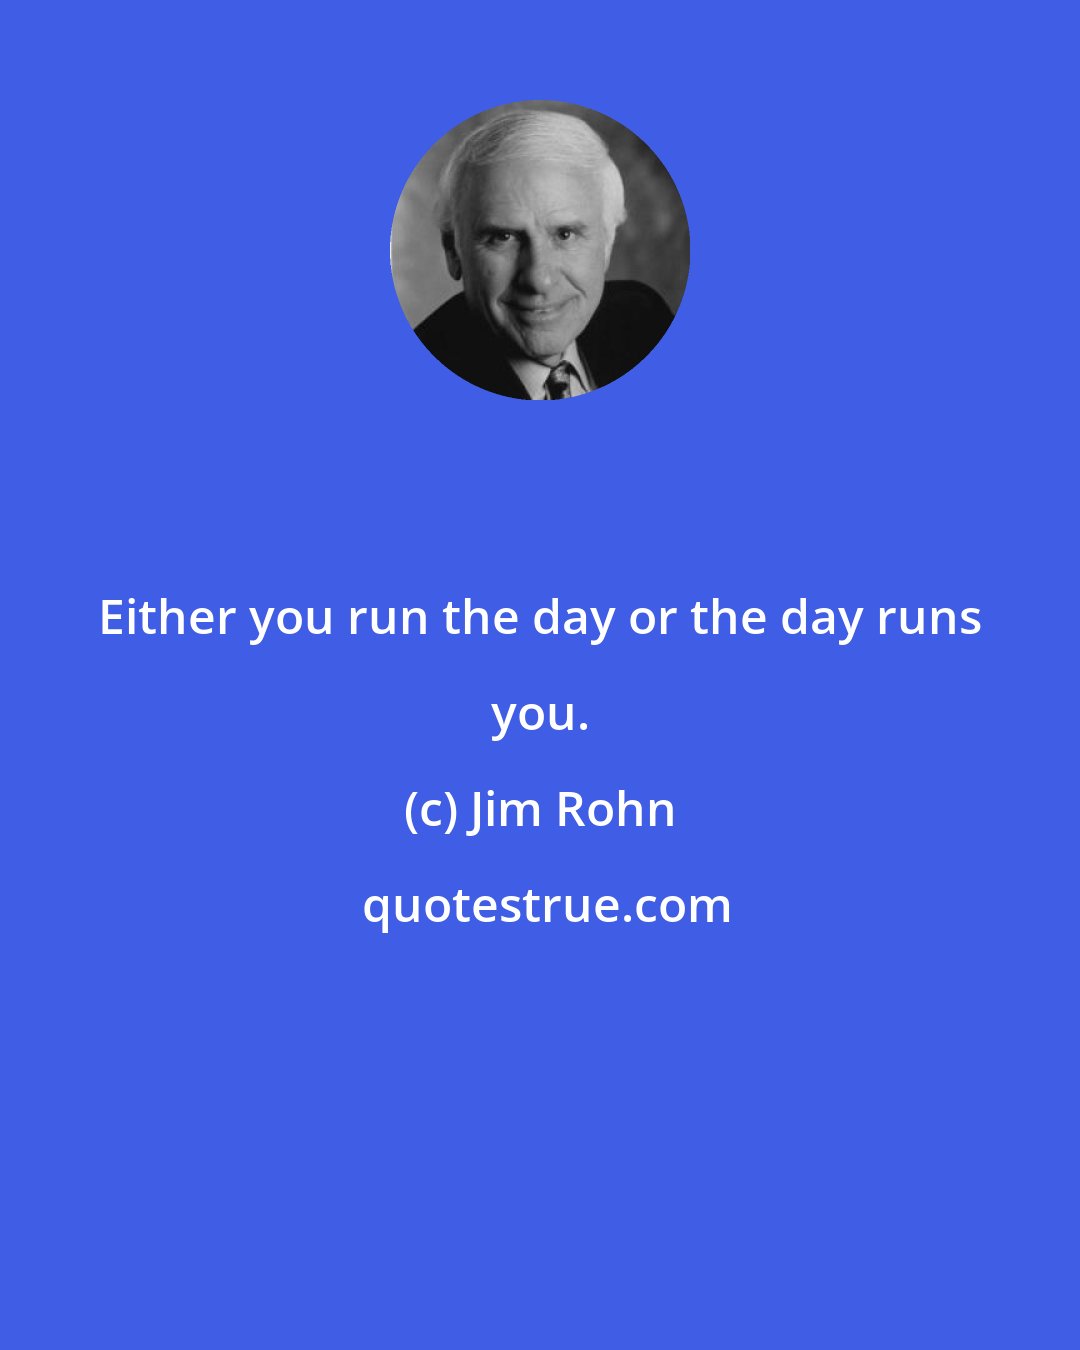 Jim Rohn: Either you run the day or the day runs you.